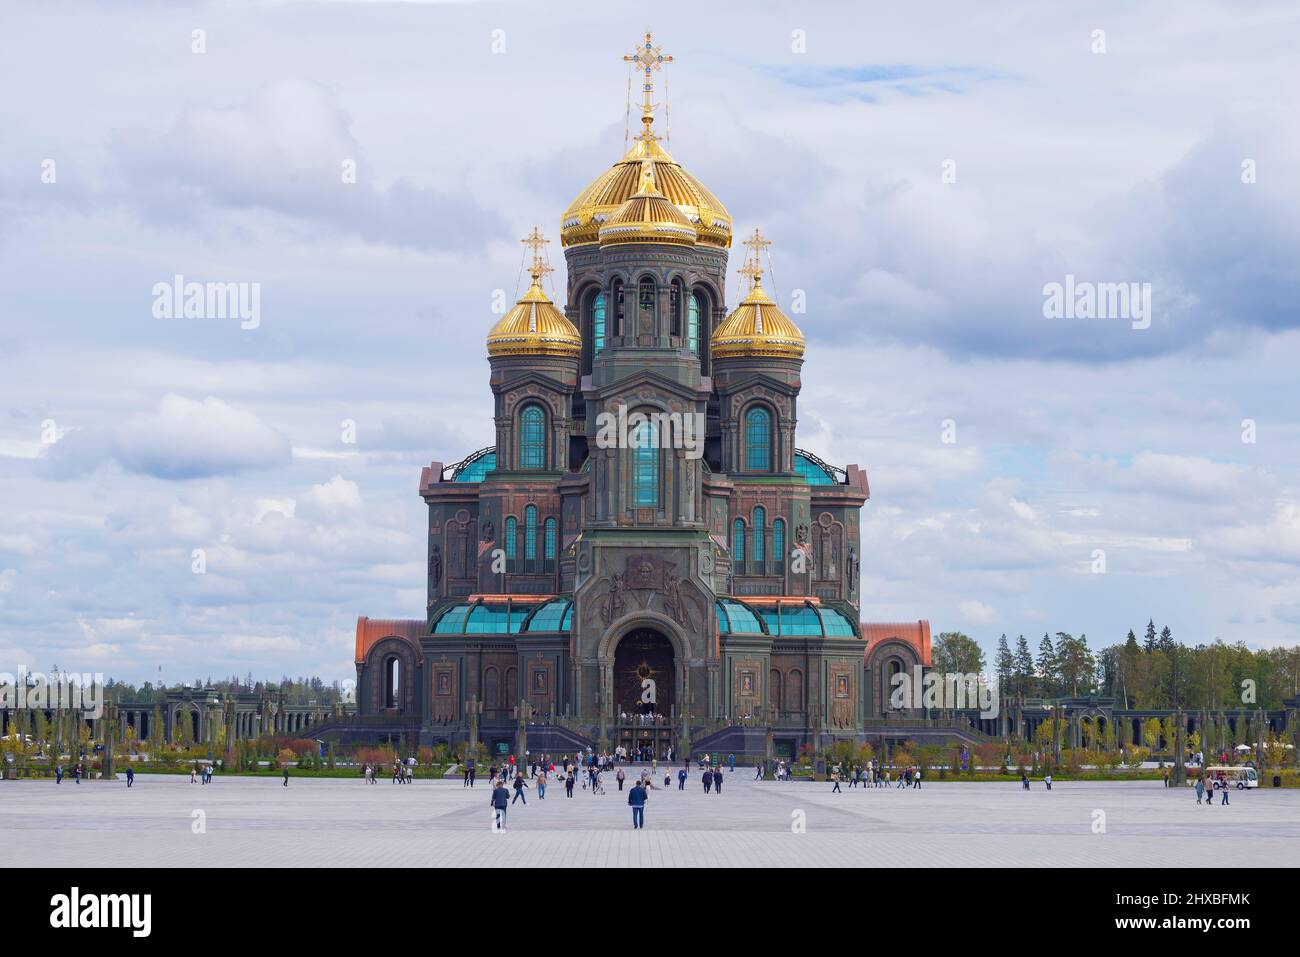 MOSCOW REGION, RUSSIA - AUGUST 27, 2020: The main temple of the Armed Forces of the Russian Federation (Patriarchal Cathedral of the Resurrection of C Stock Photo